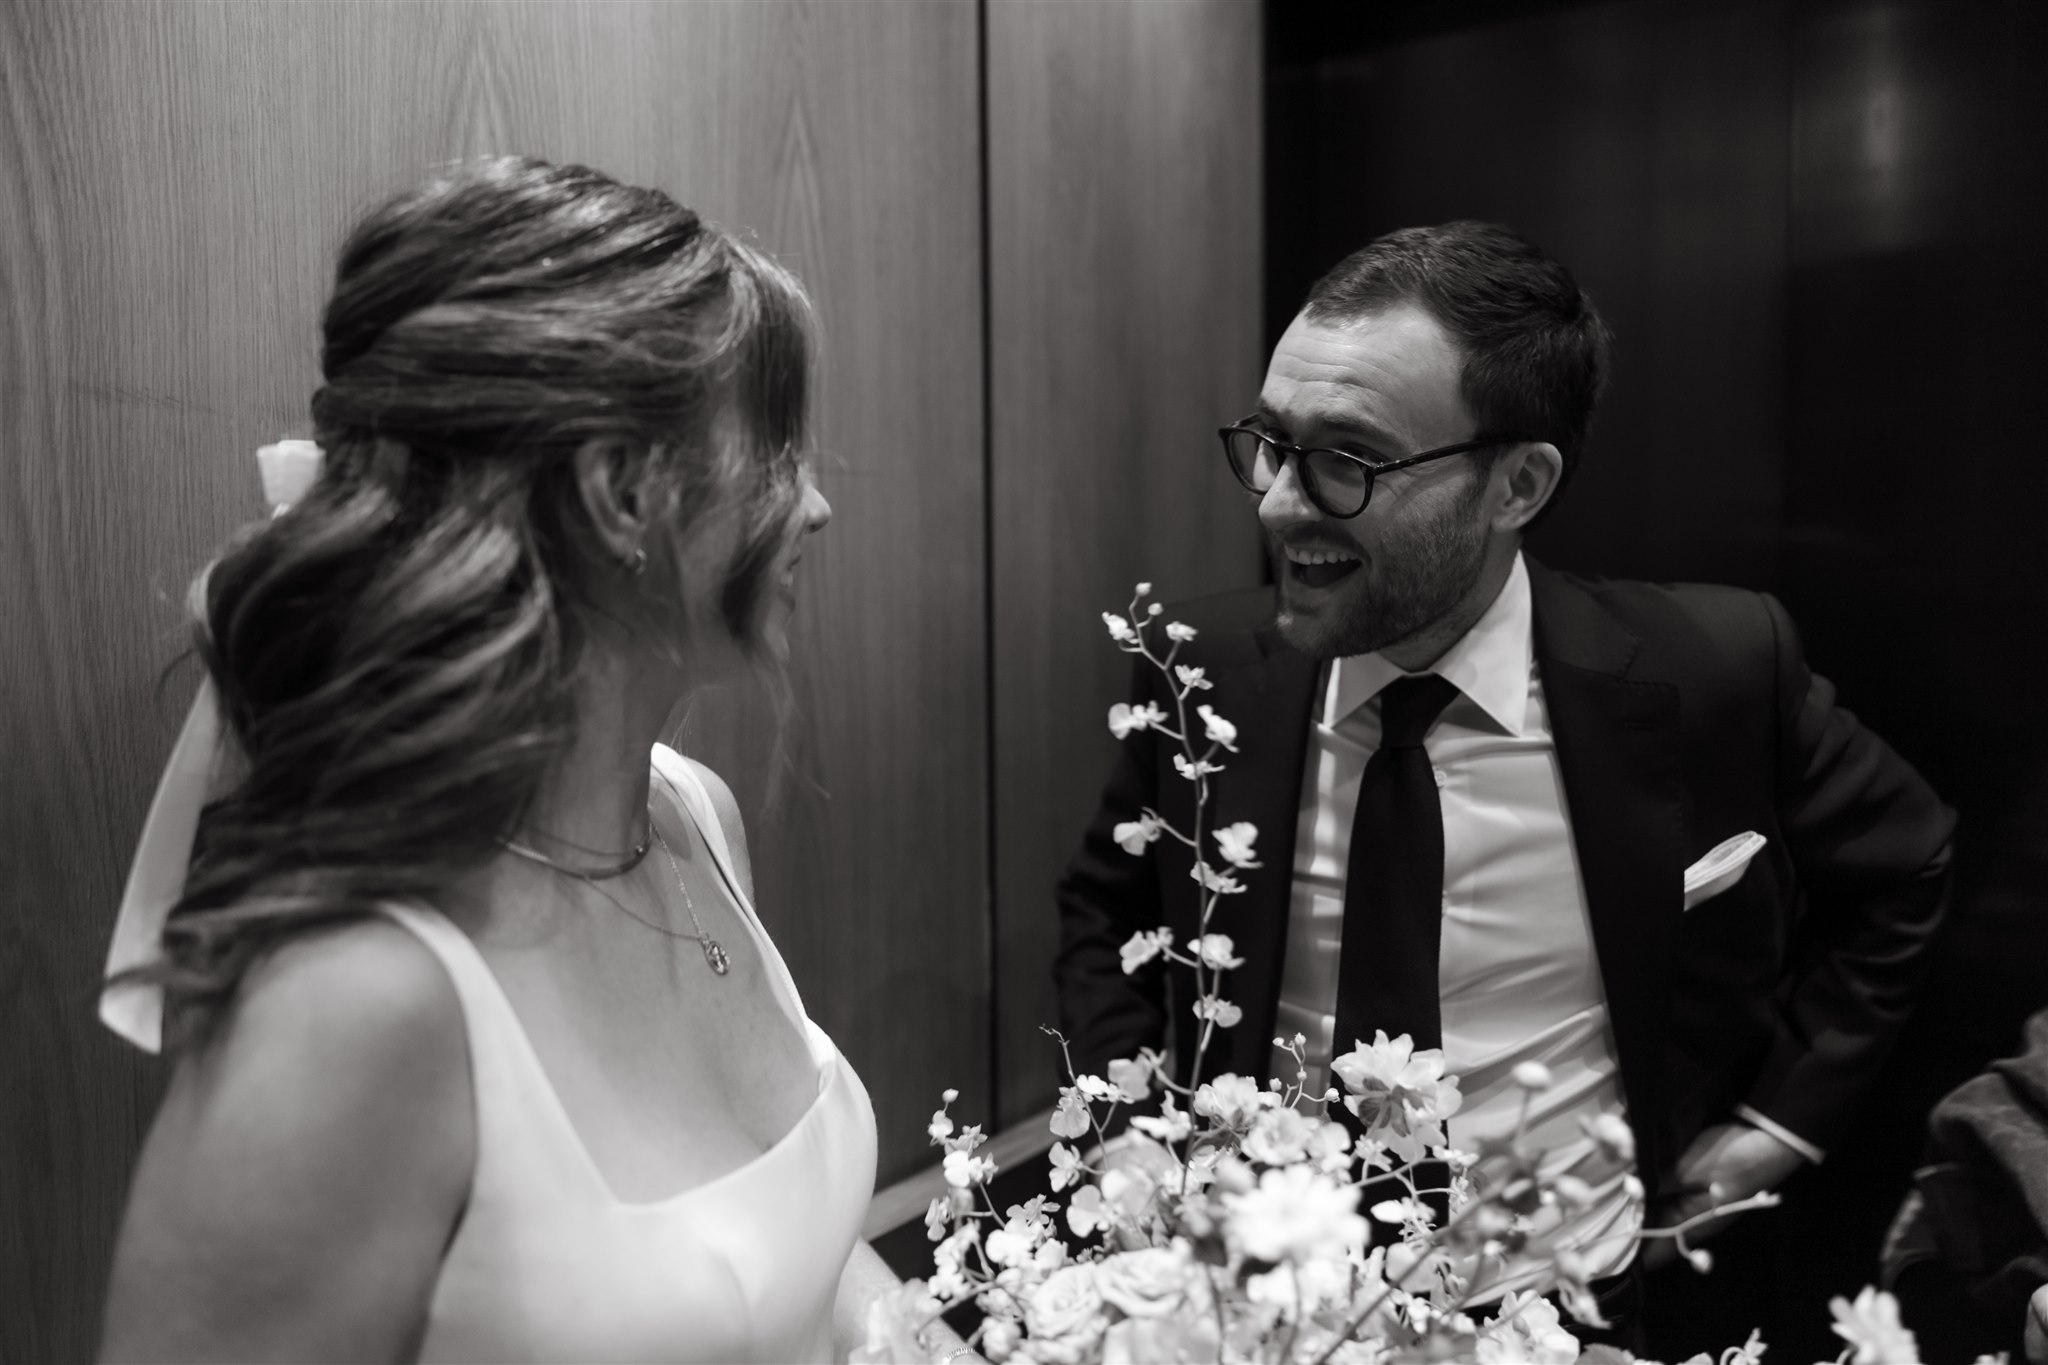 A bride and groom smiling at each other inside an elevator, with the bride holding a bouquet of flowers.